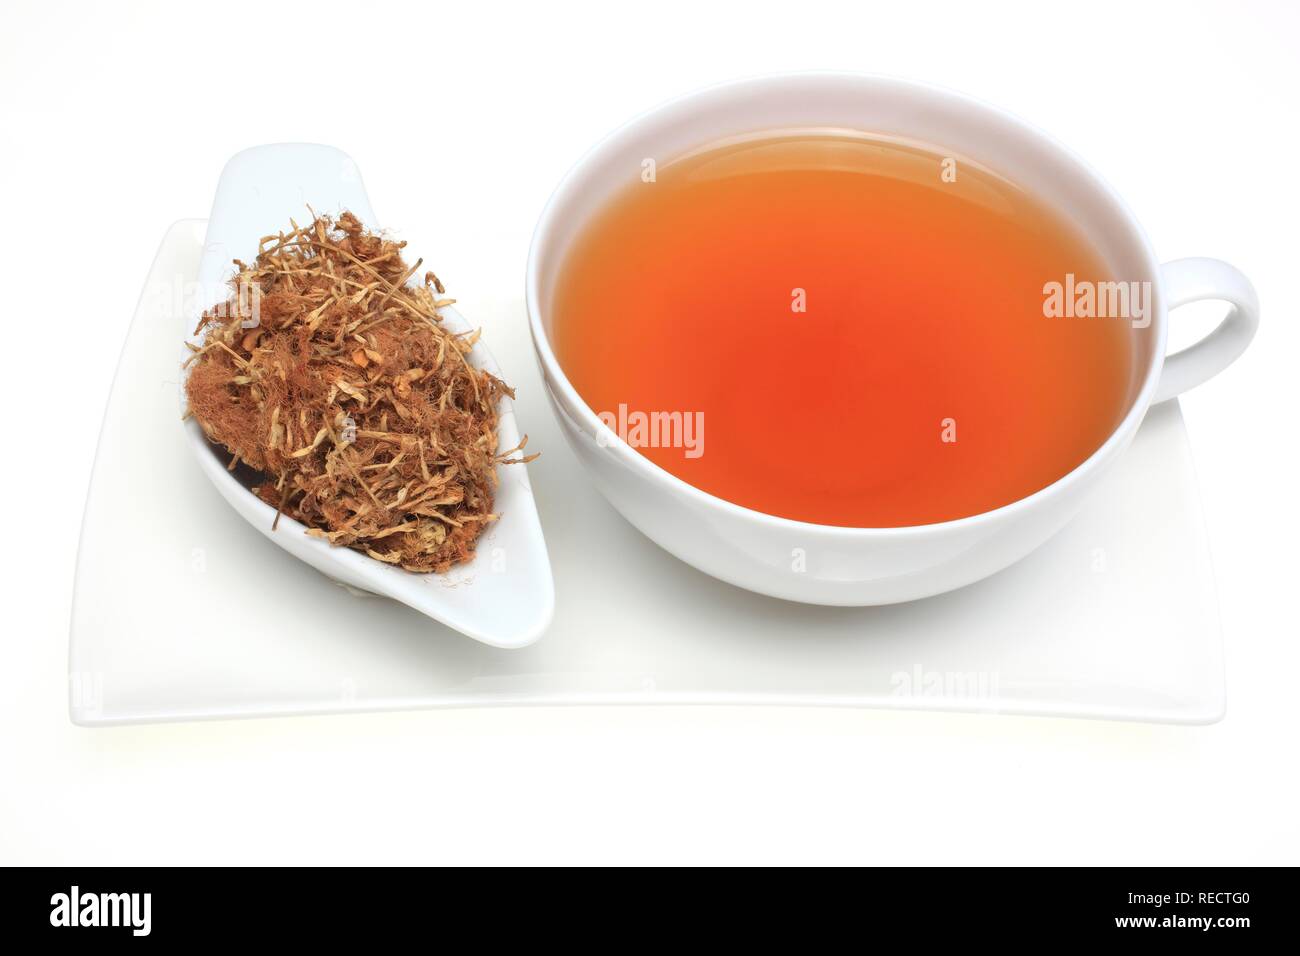 Medicinal tea made of the dried blossoms of medicinal plant Albizzia (Albizzia flos, Albizia julibrissin), Mimosa flower tree Stock Photo